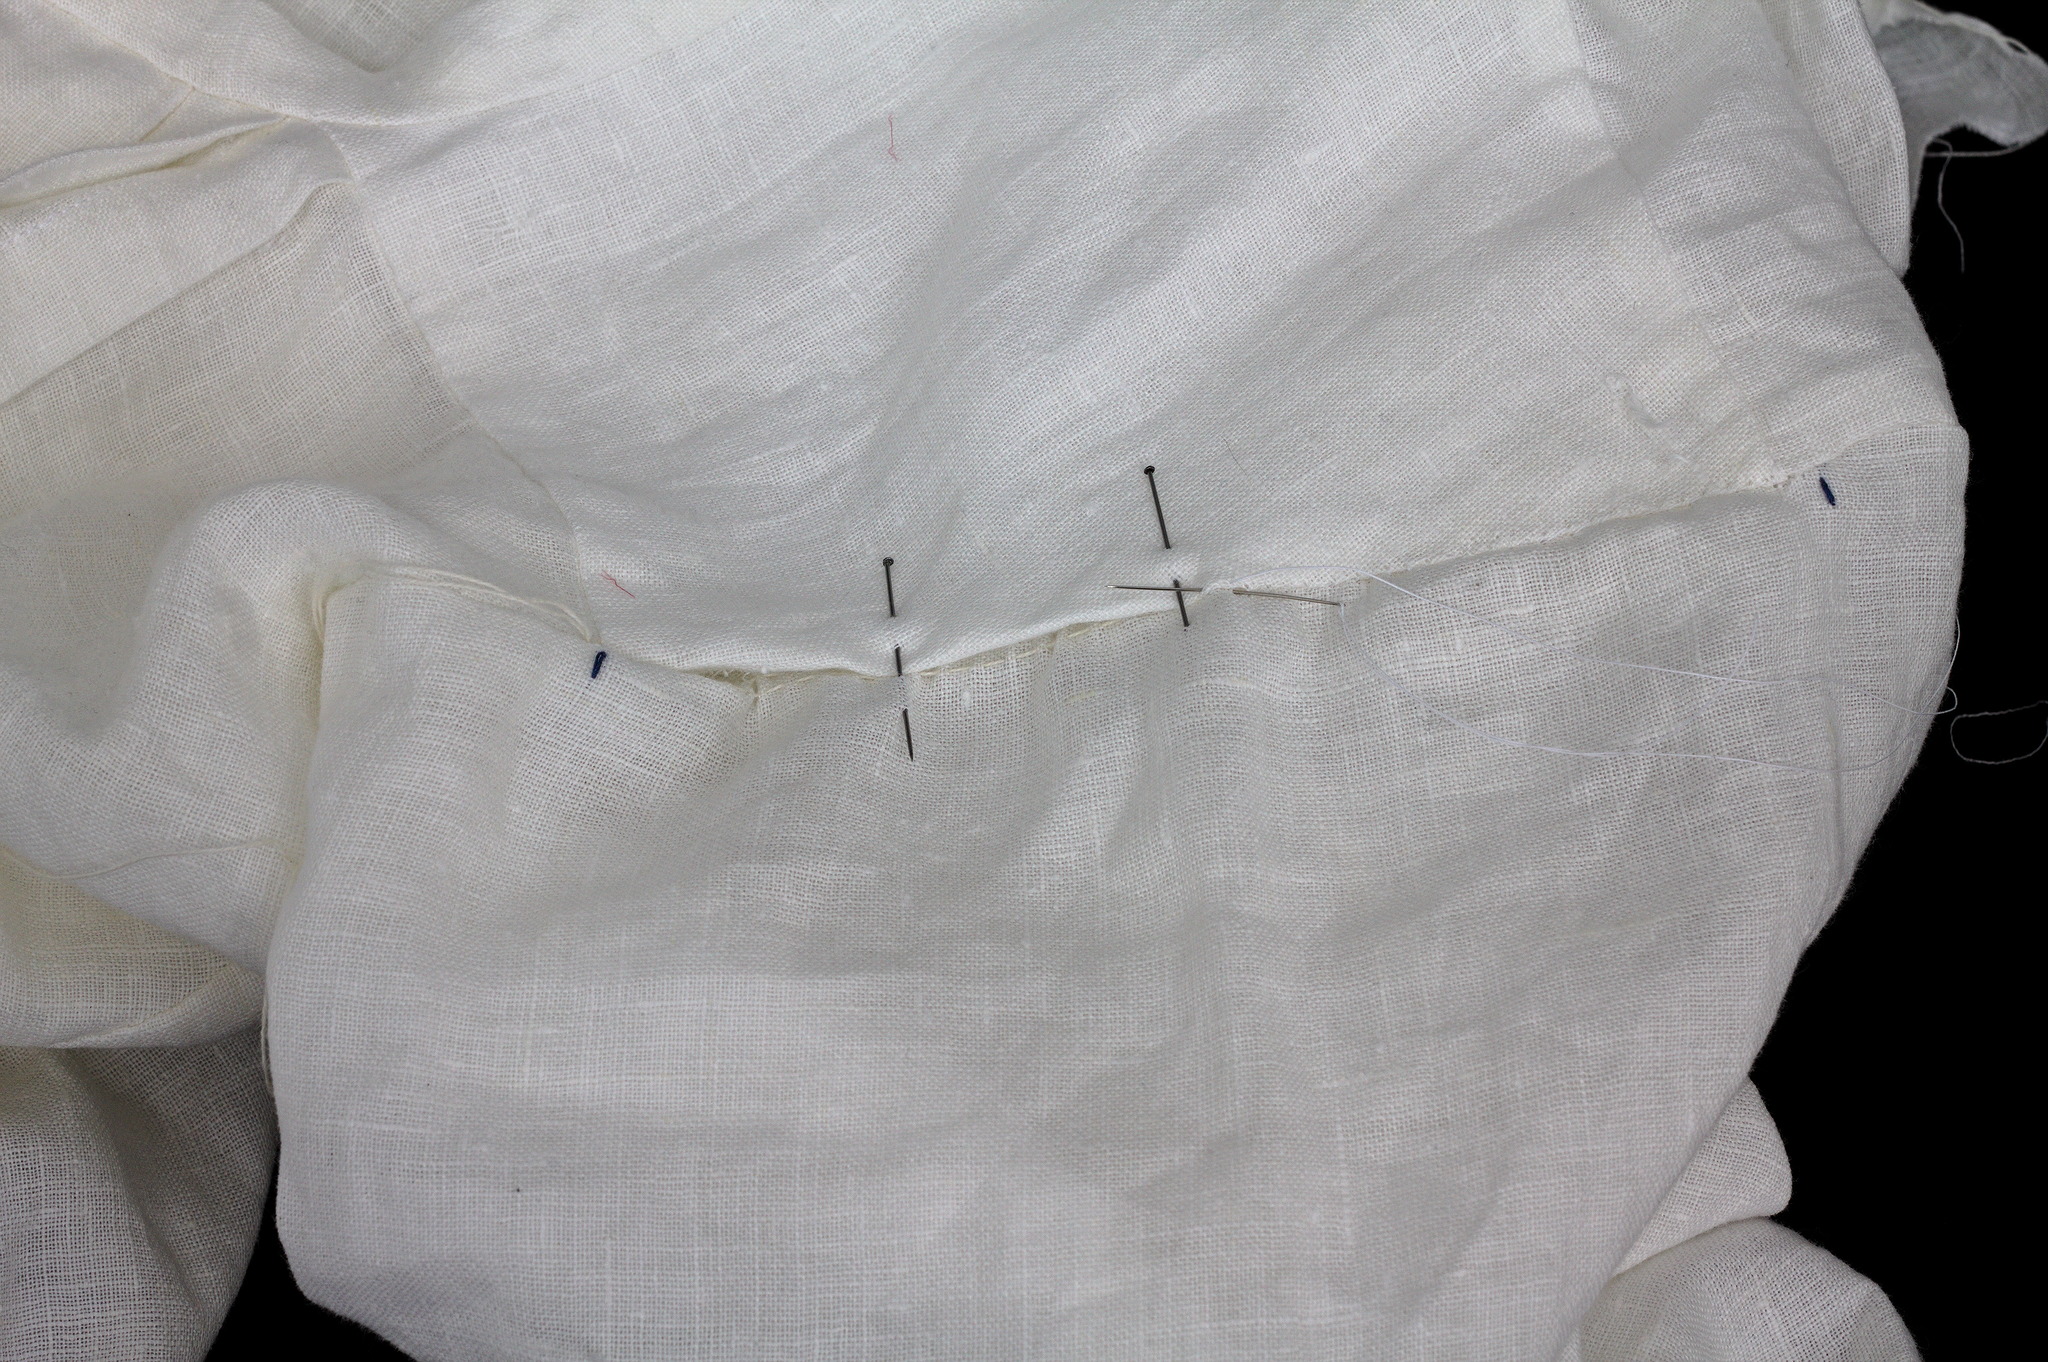 ../../../_images/0611-sewing_gathered_sleeve.jpg